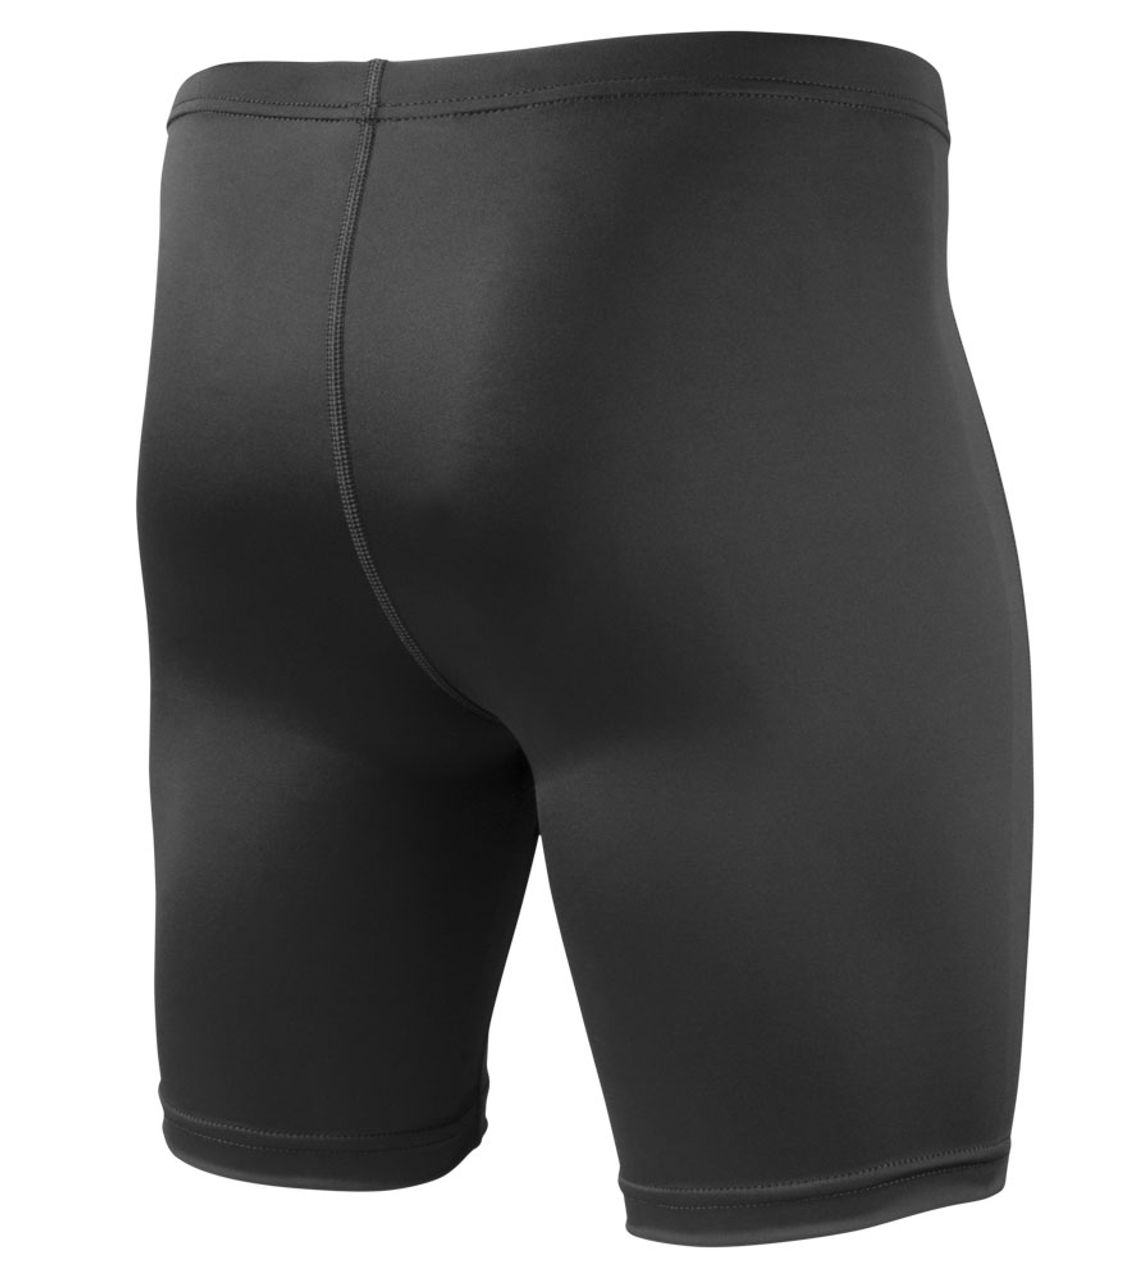 Men's Classic 2.0 Compression Workout Shorts - Made in USA